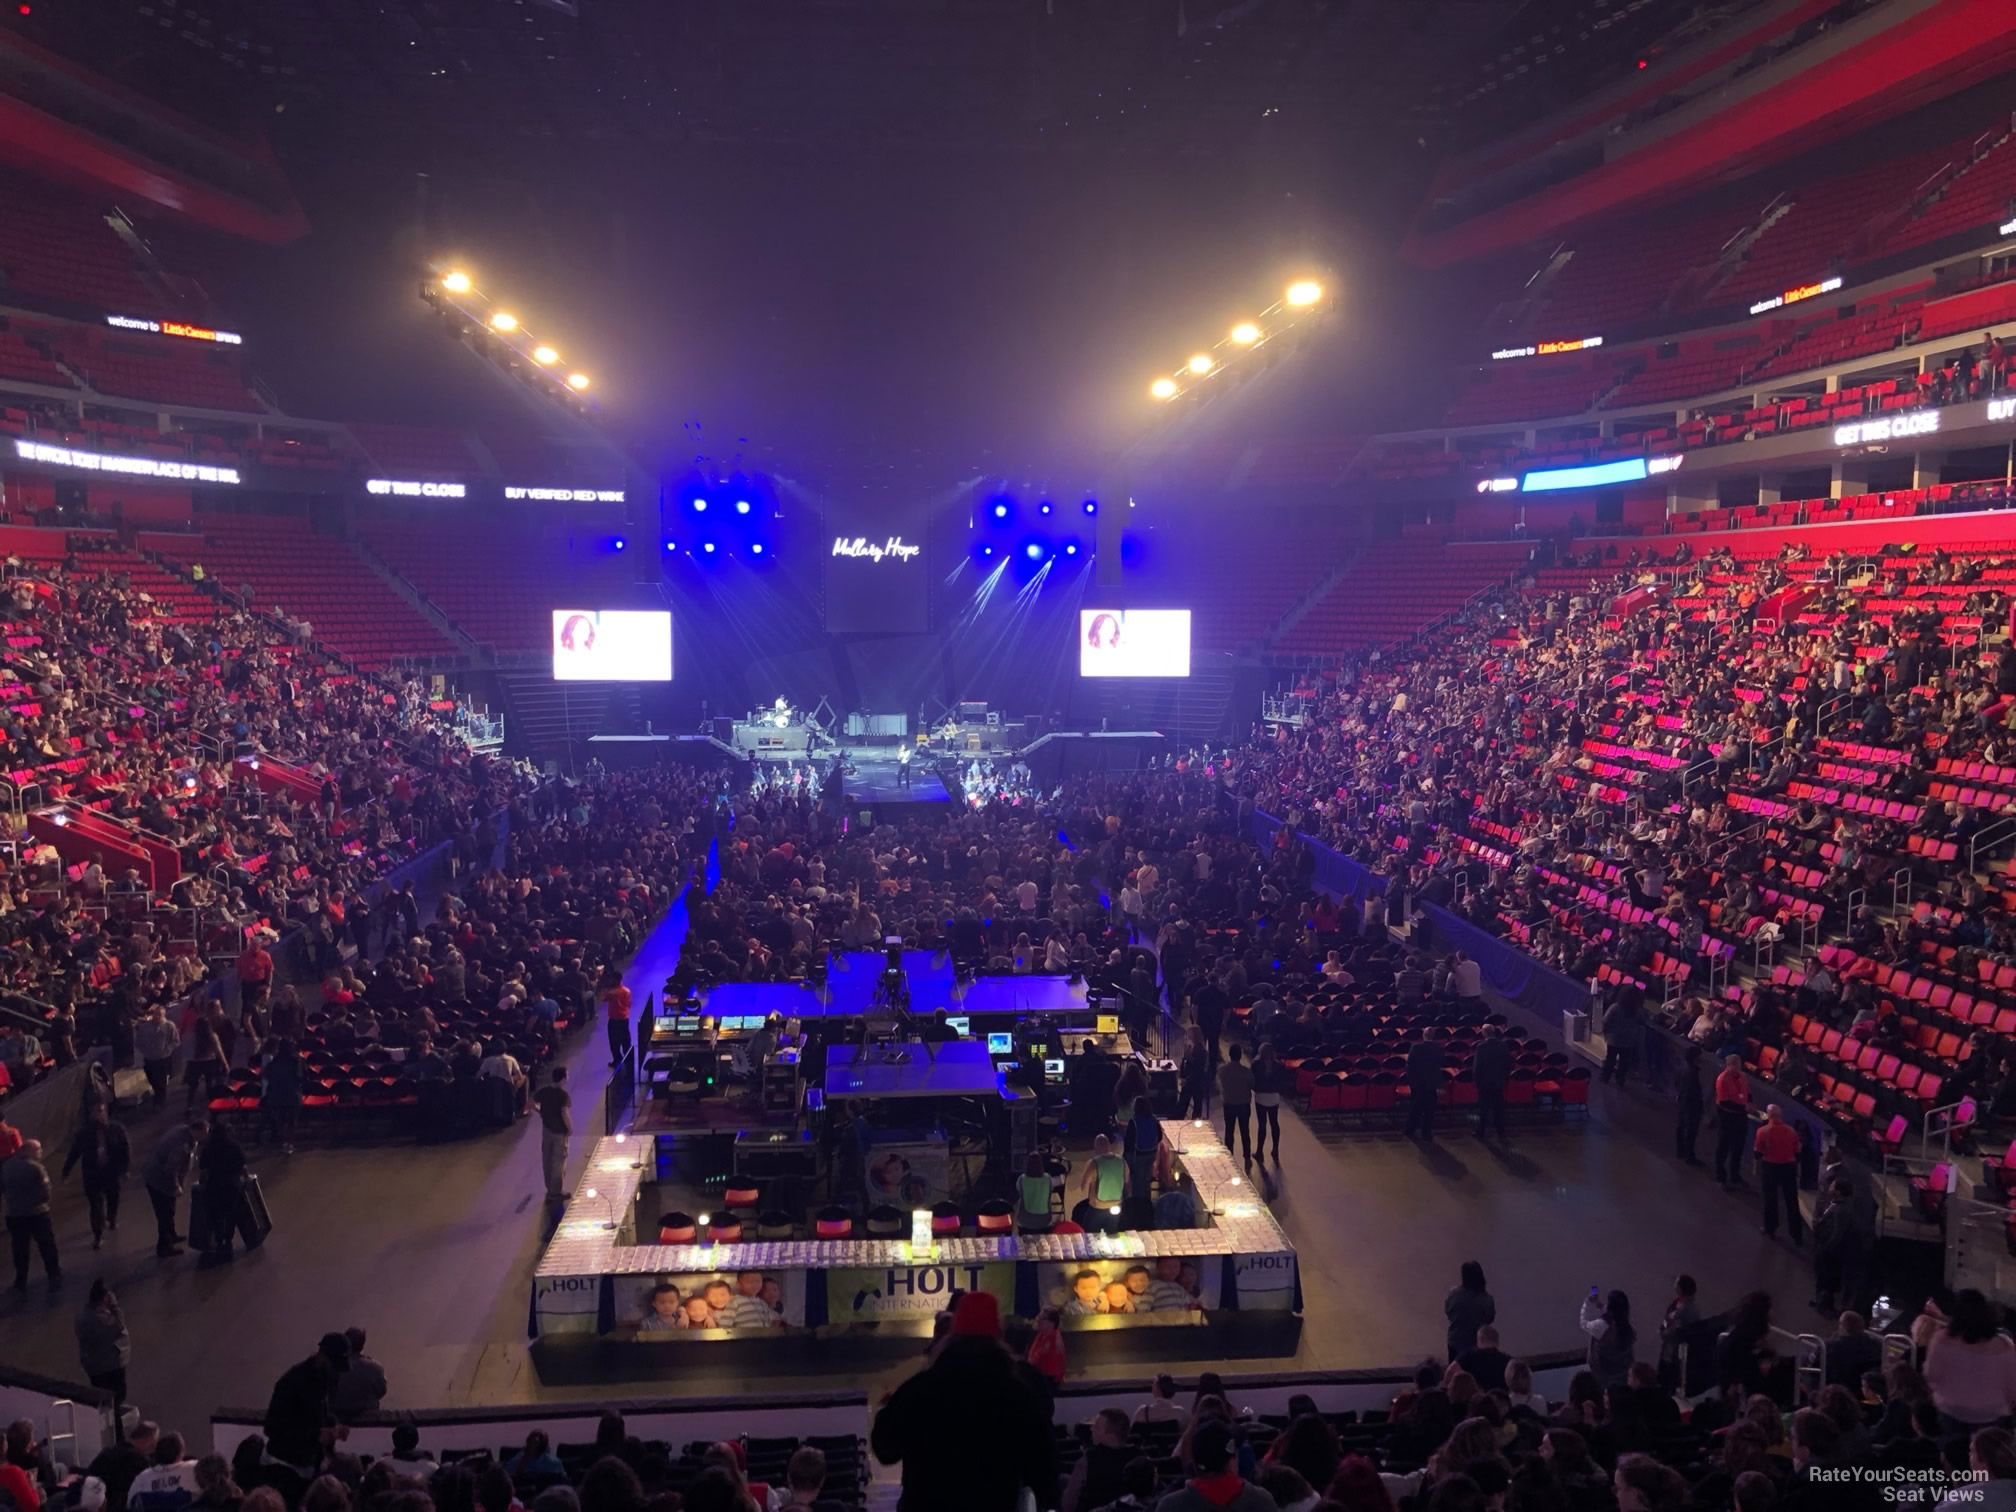 head-on concert view at Little Caesars Arena